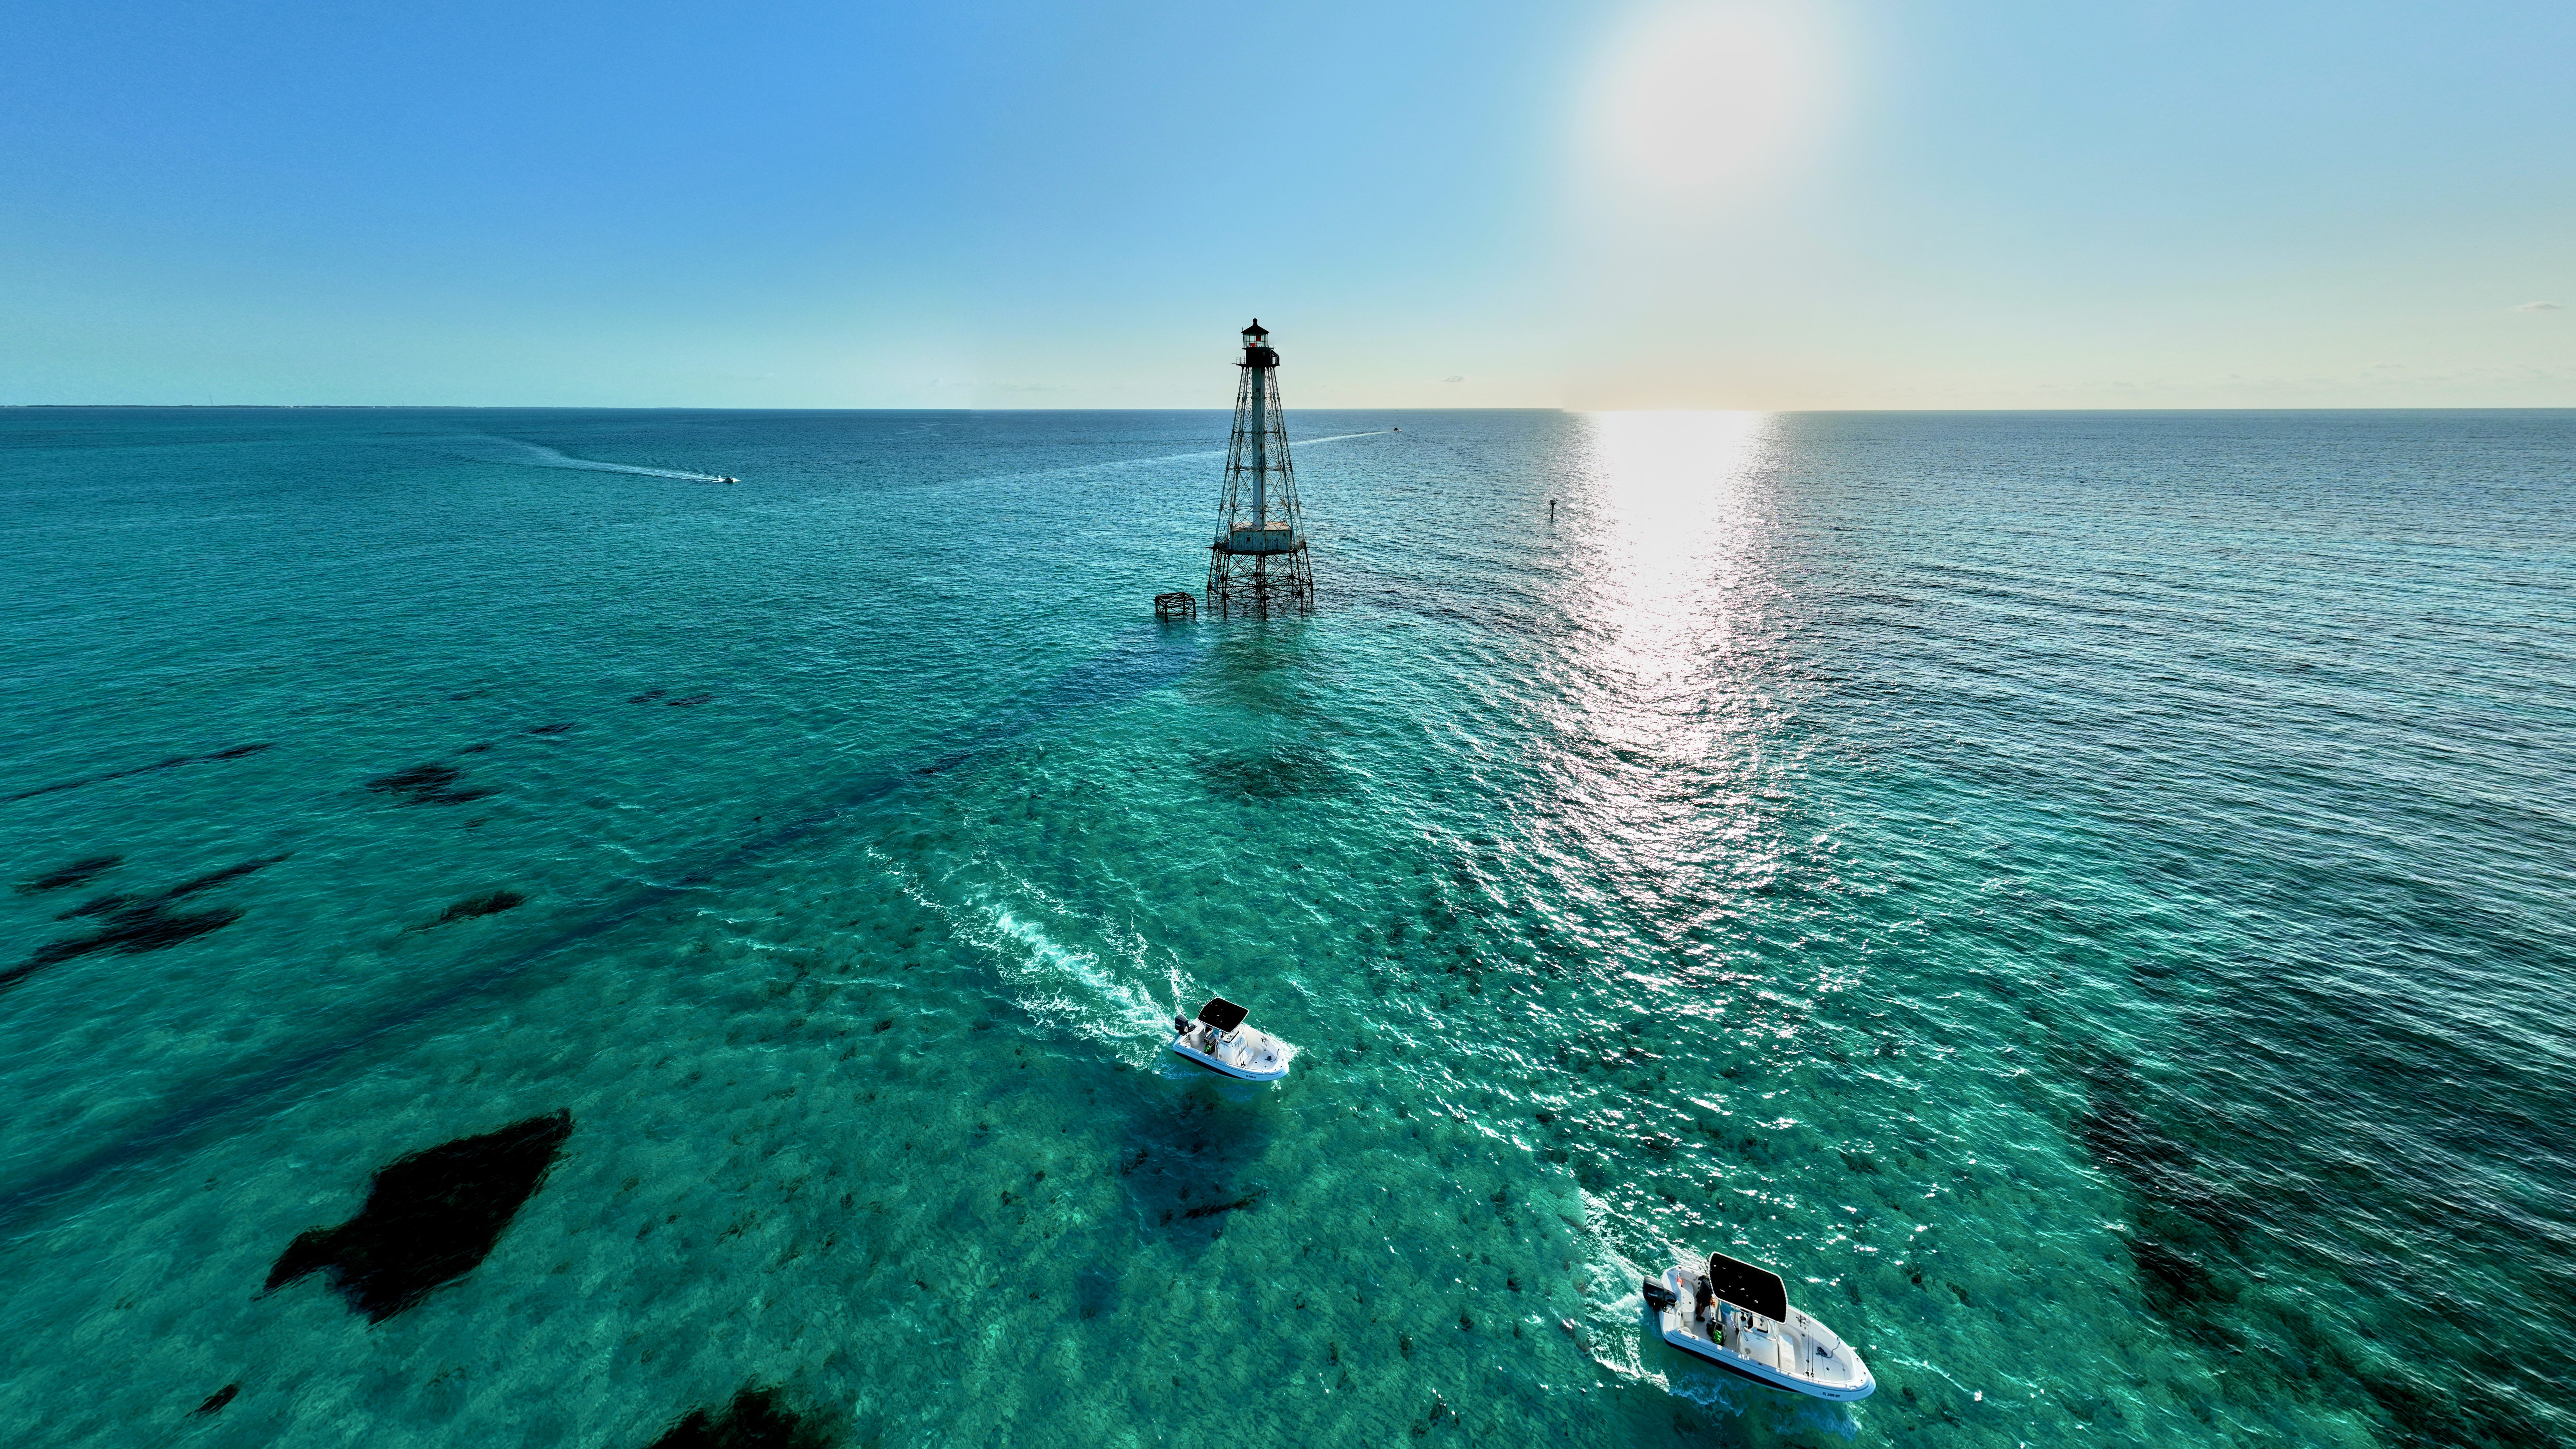 Once you reach the 133-foot Alligator Reef Lighthouse, snorkel to see colorful fish and remnants of shipwrecks below the surface.